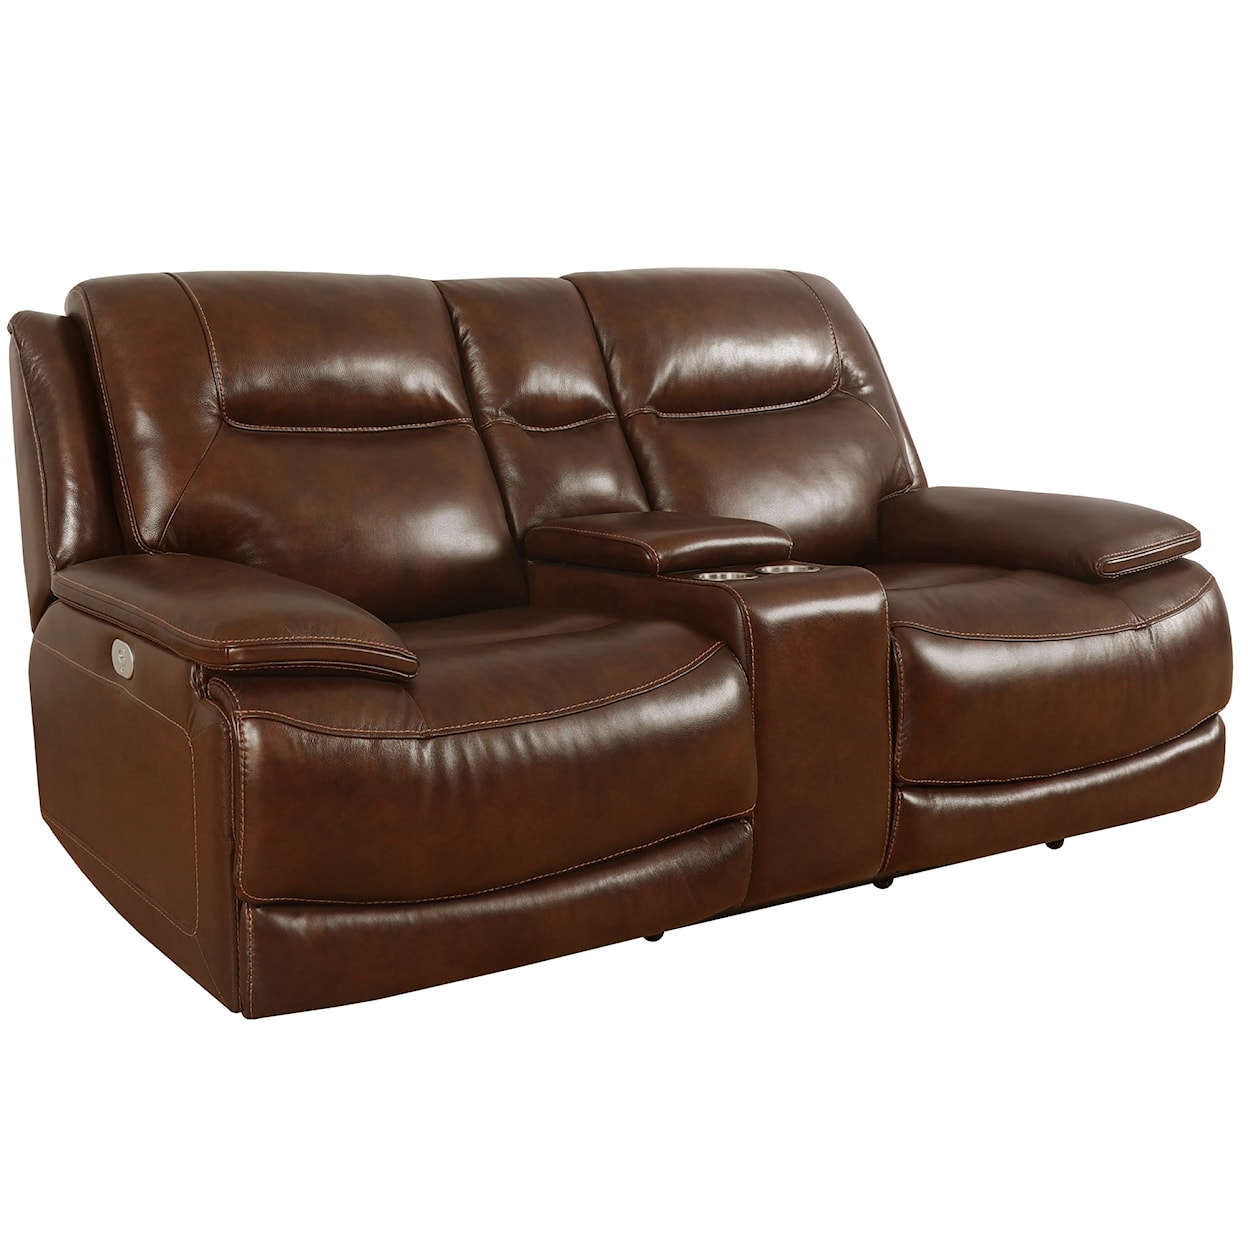 Paramount Living Colossus - Napoli Brown Power Loveseat